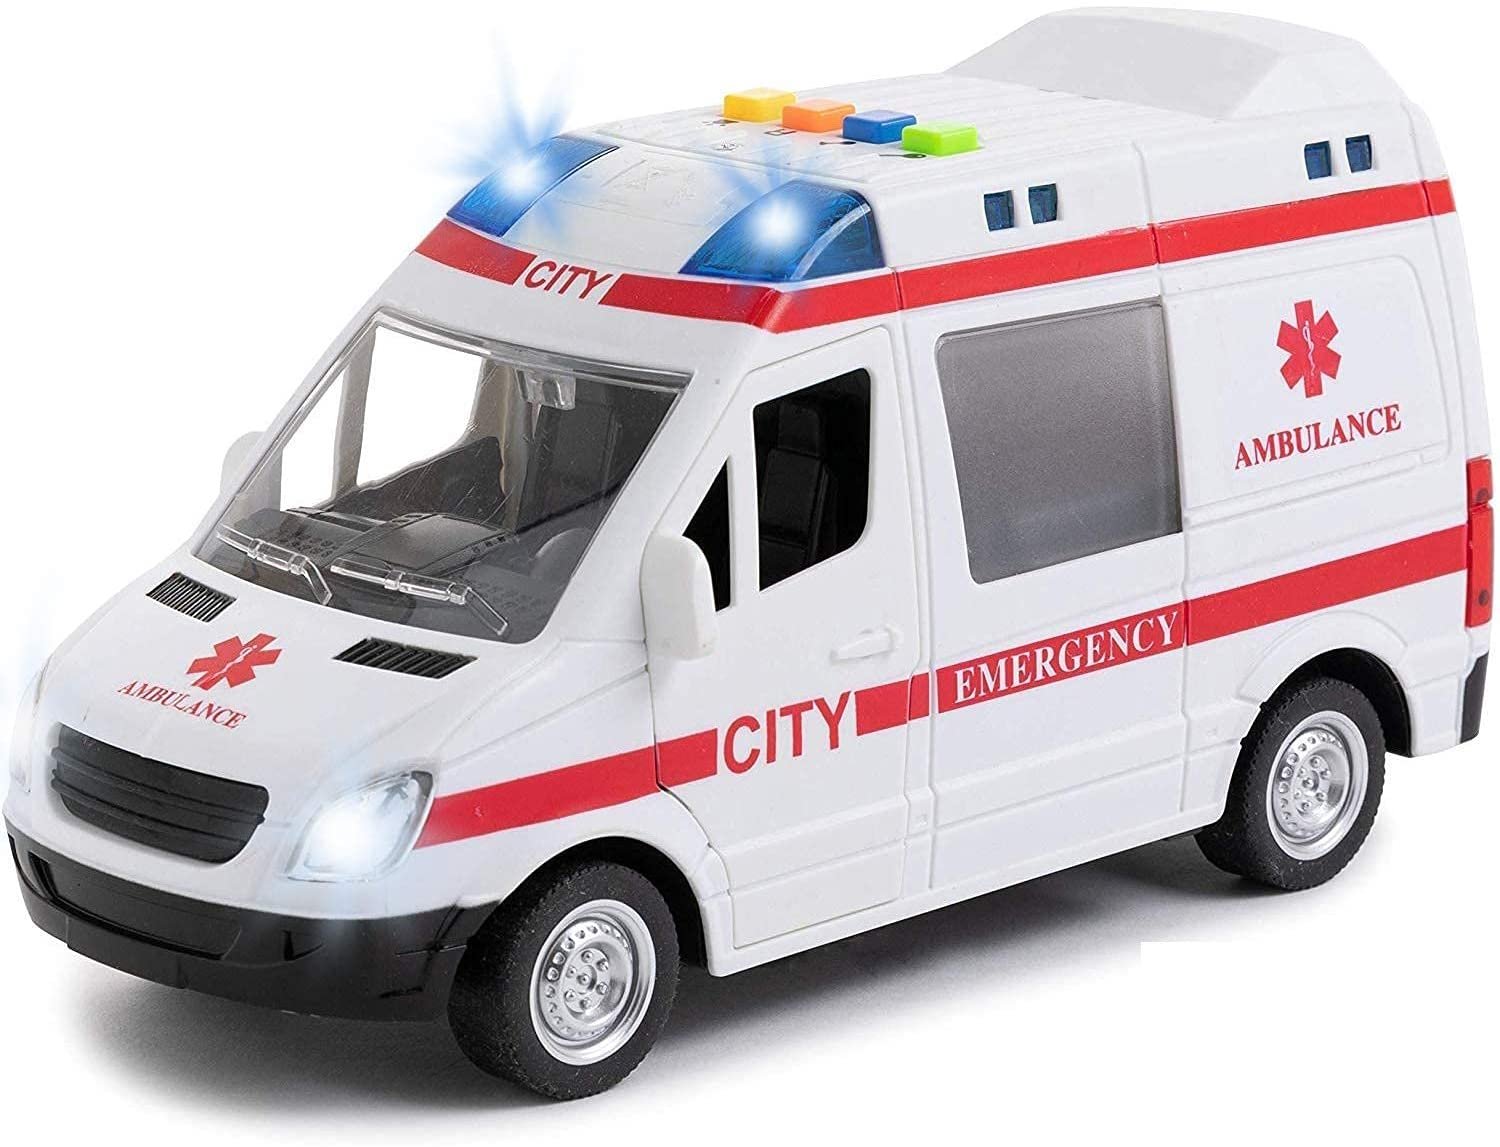 Ambulance Toy Car with Light & Siren Sound Effects - Friction Powered Wheels & LED Lights - Heavy Duty Plastic Rescue Vehicle Toy for Kids & Children by Toy To Enjoy